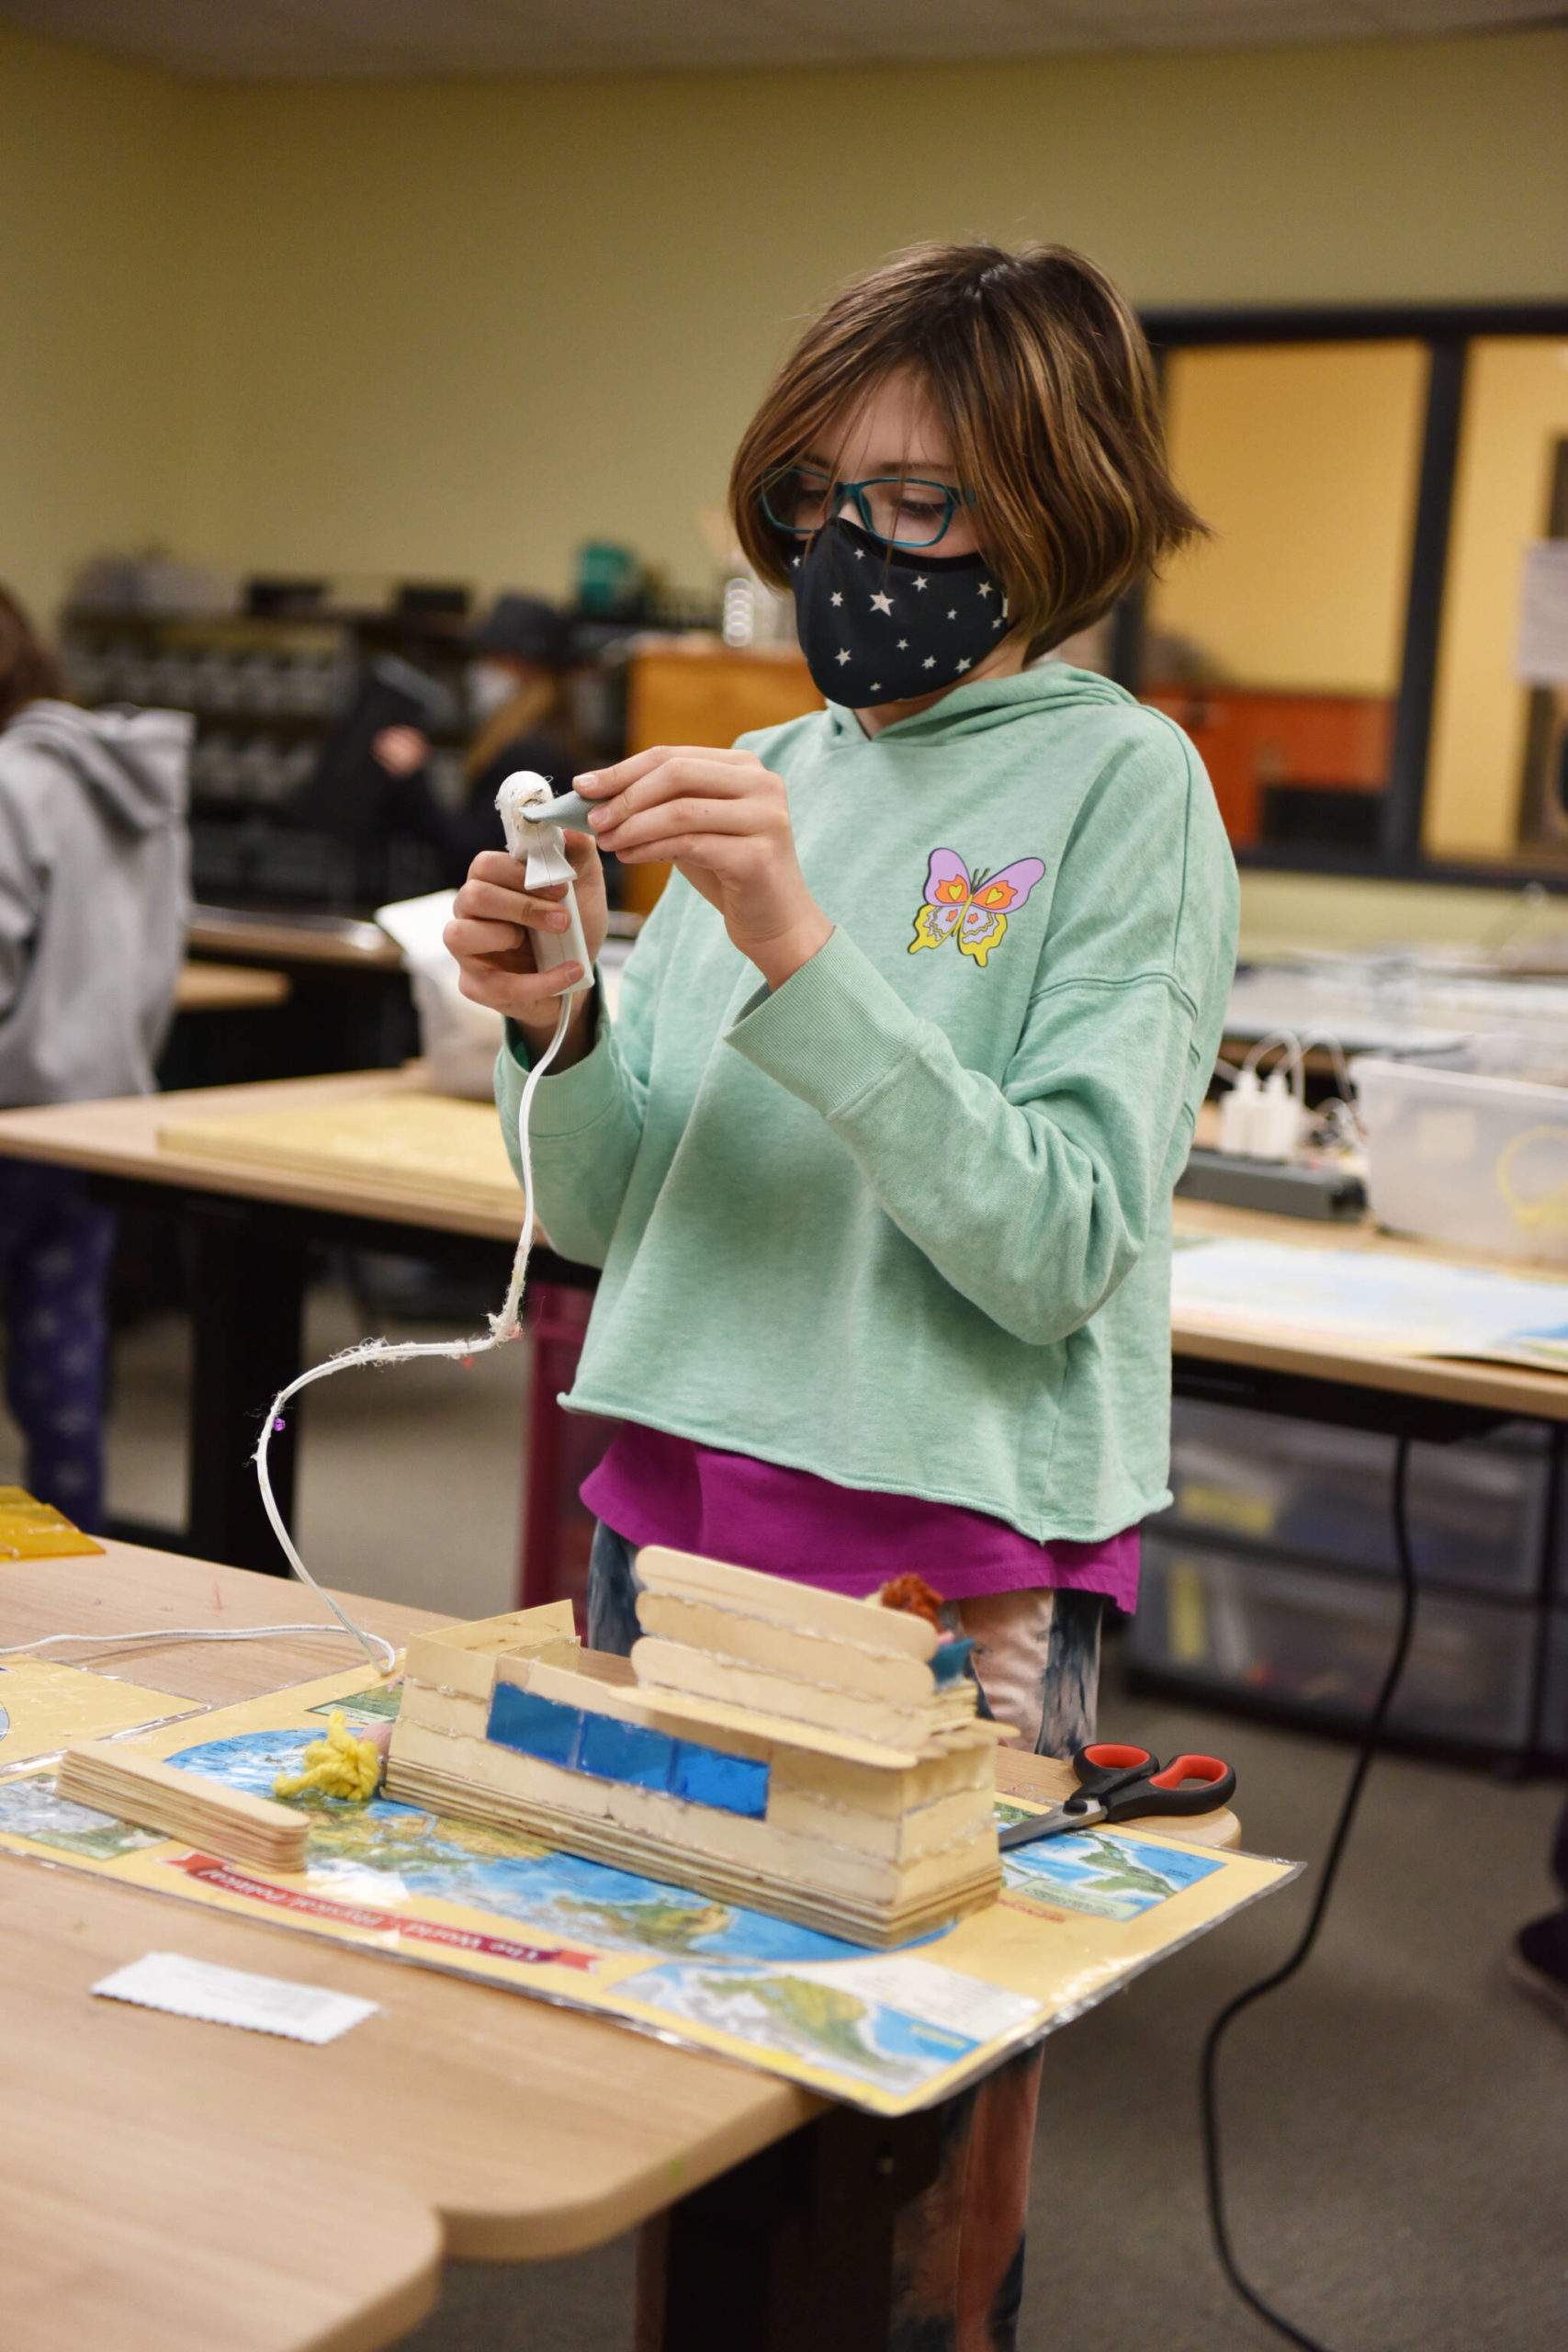 Fifth-grader Maggie Carson carefully makes one of her ‘corkettes’ at the Maker Space where Sakai students create whatever they want.